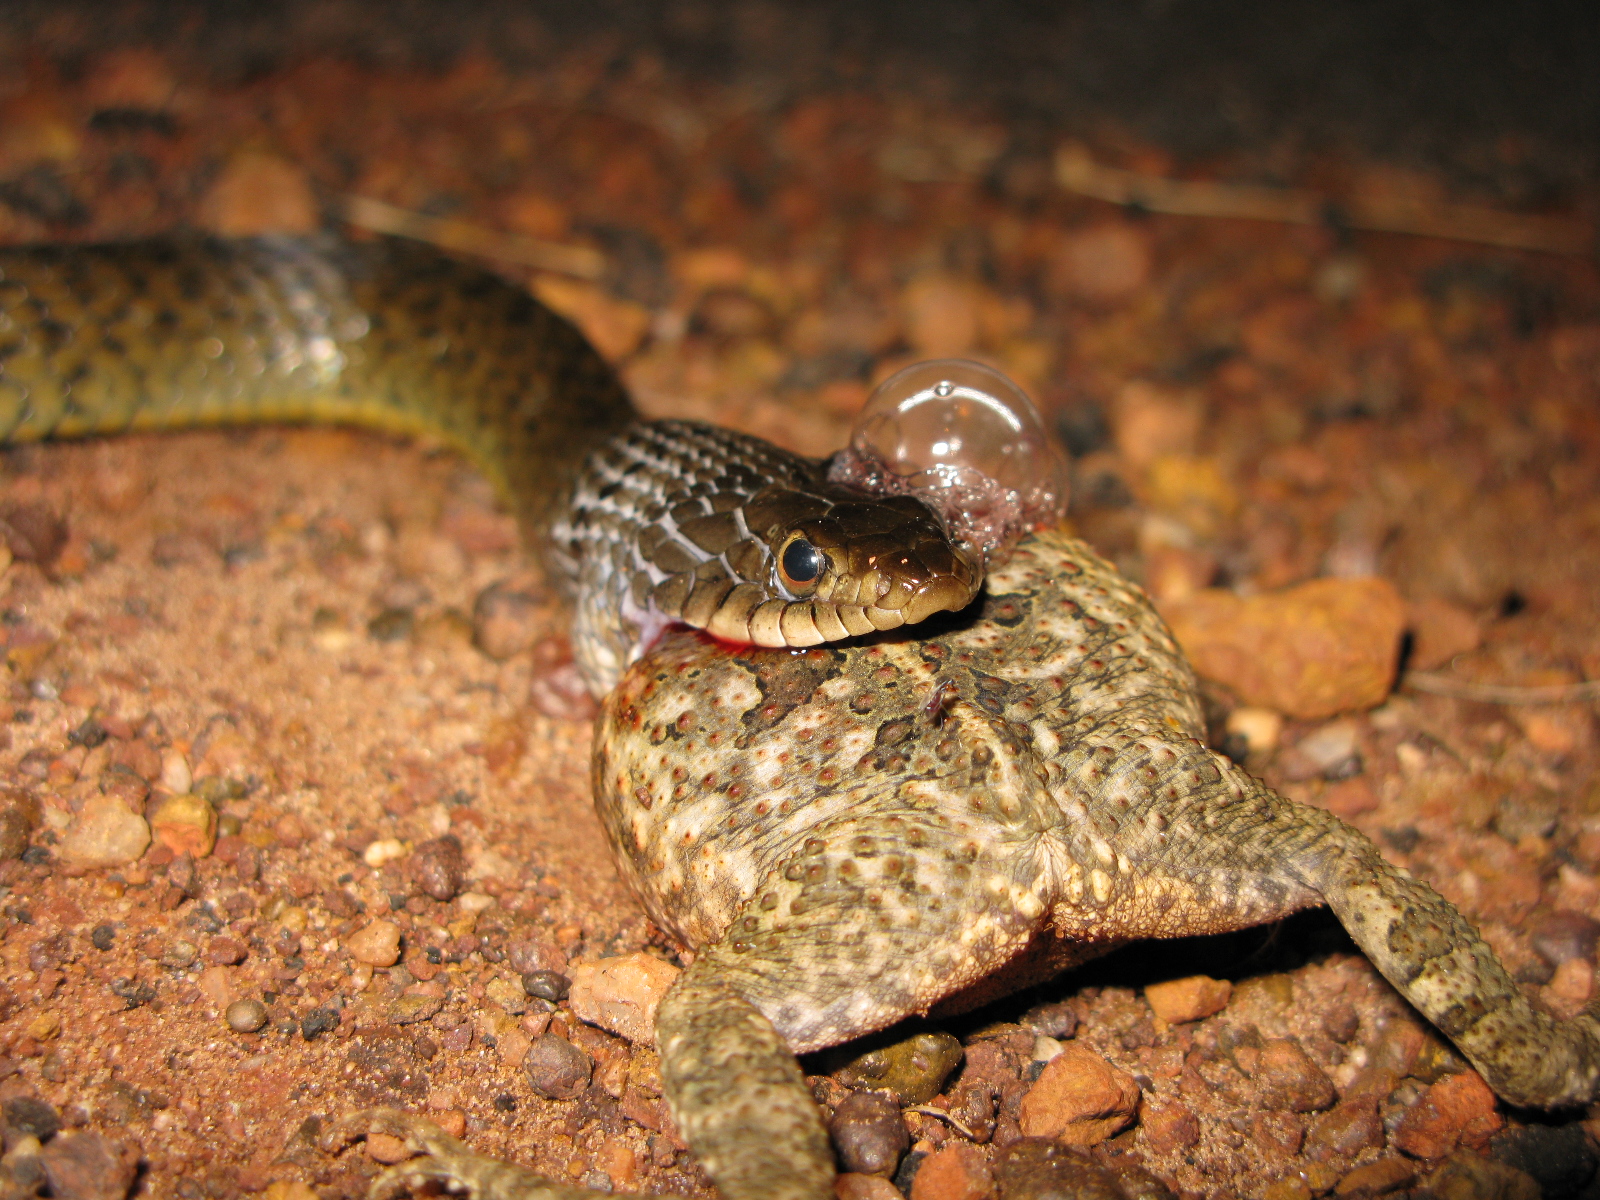 Keelback snakes can eat Cane Toads